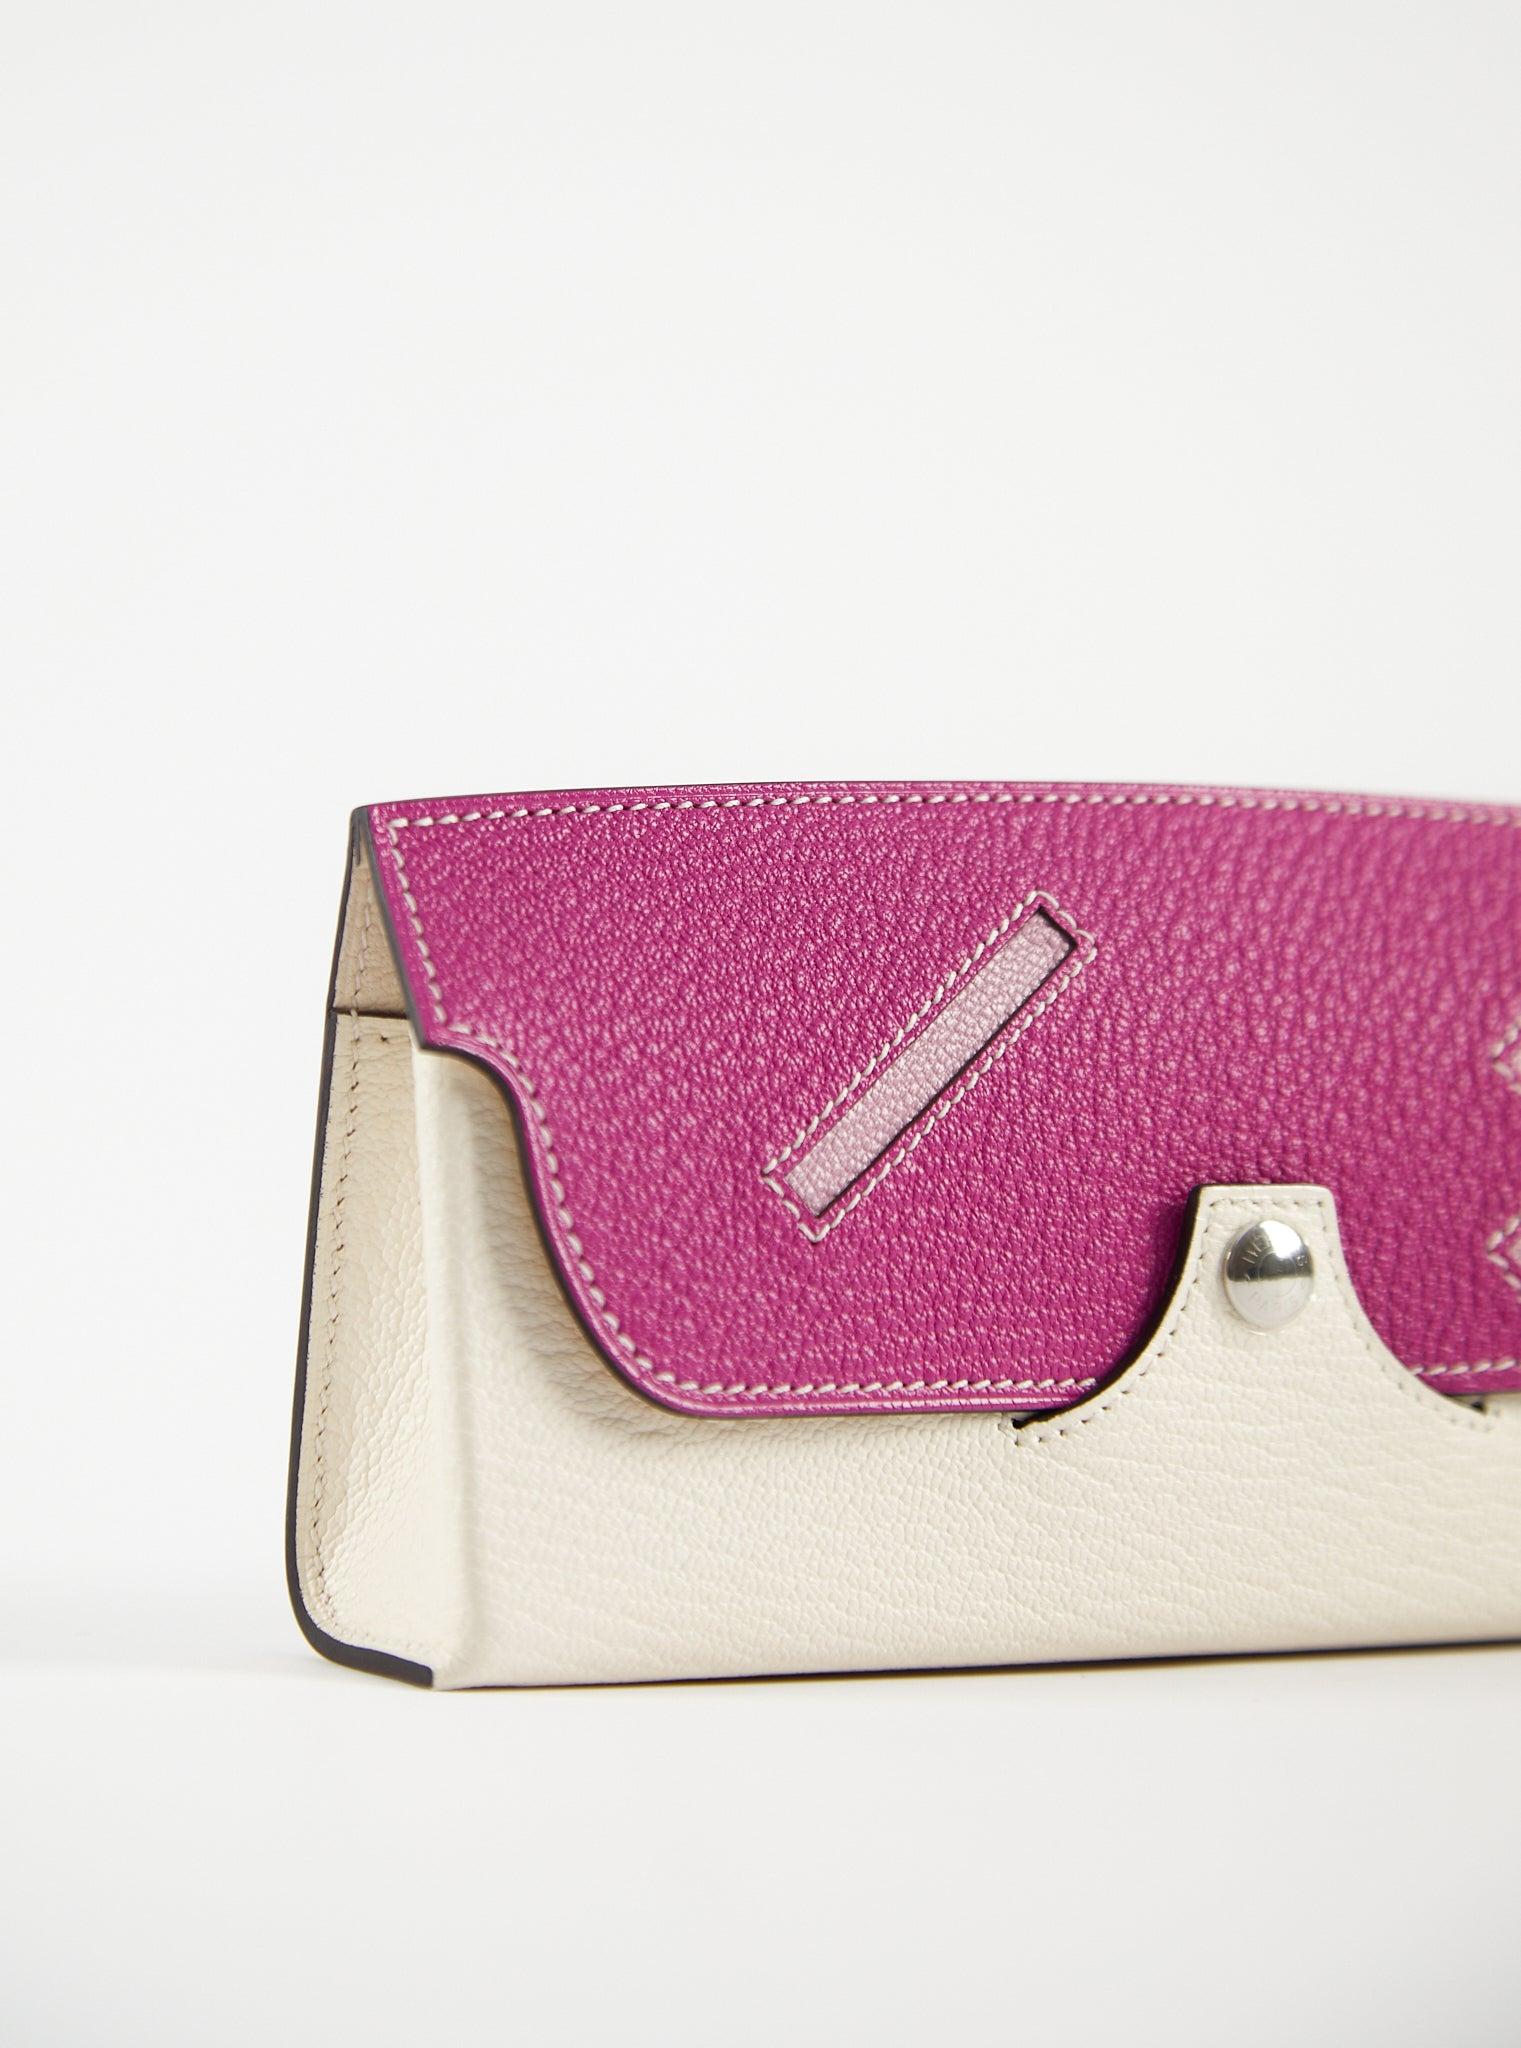 HERMÈS IN THE LOOP WINK GLASSES CASE NATA & FUCHSIA Chevre Mysore Leather In Excellent Condition For Sale In London, GB